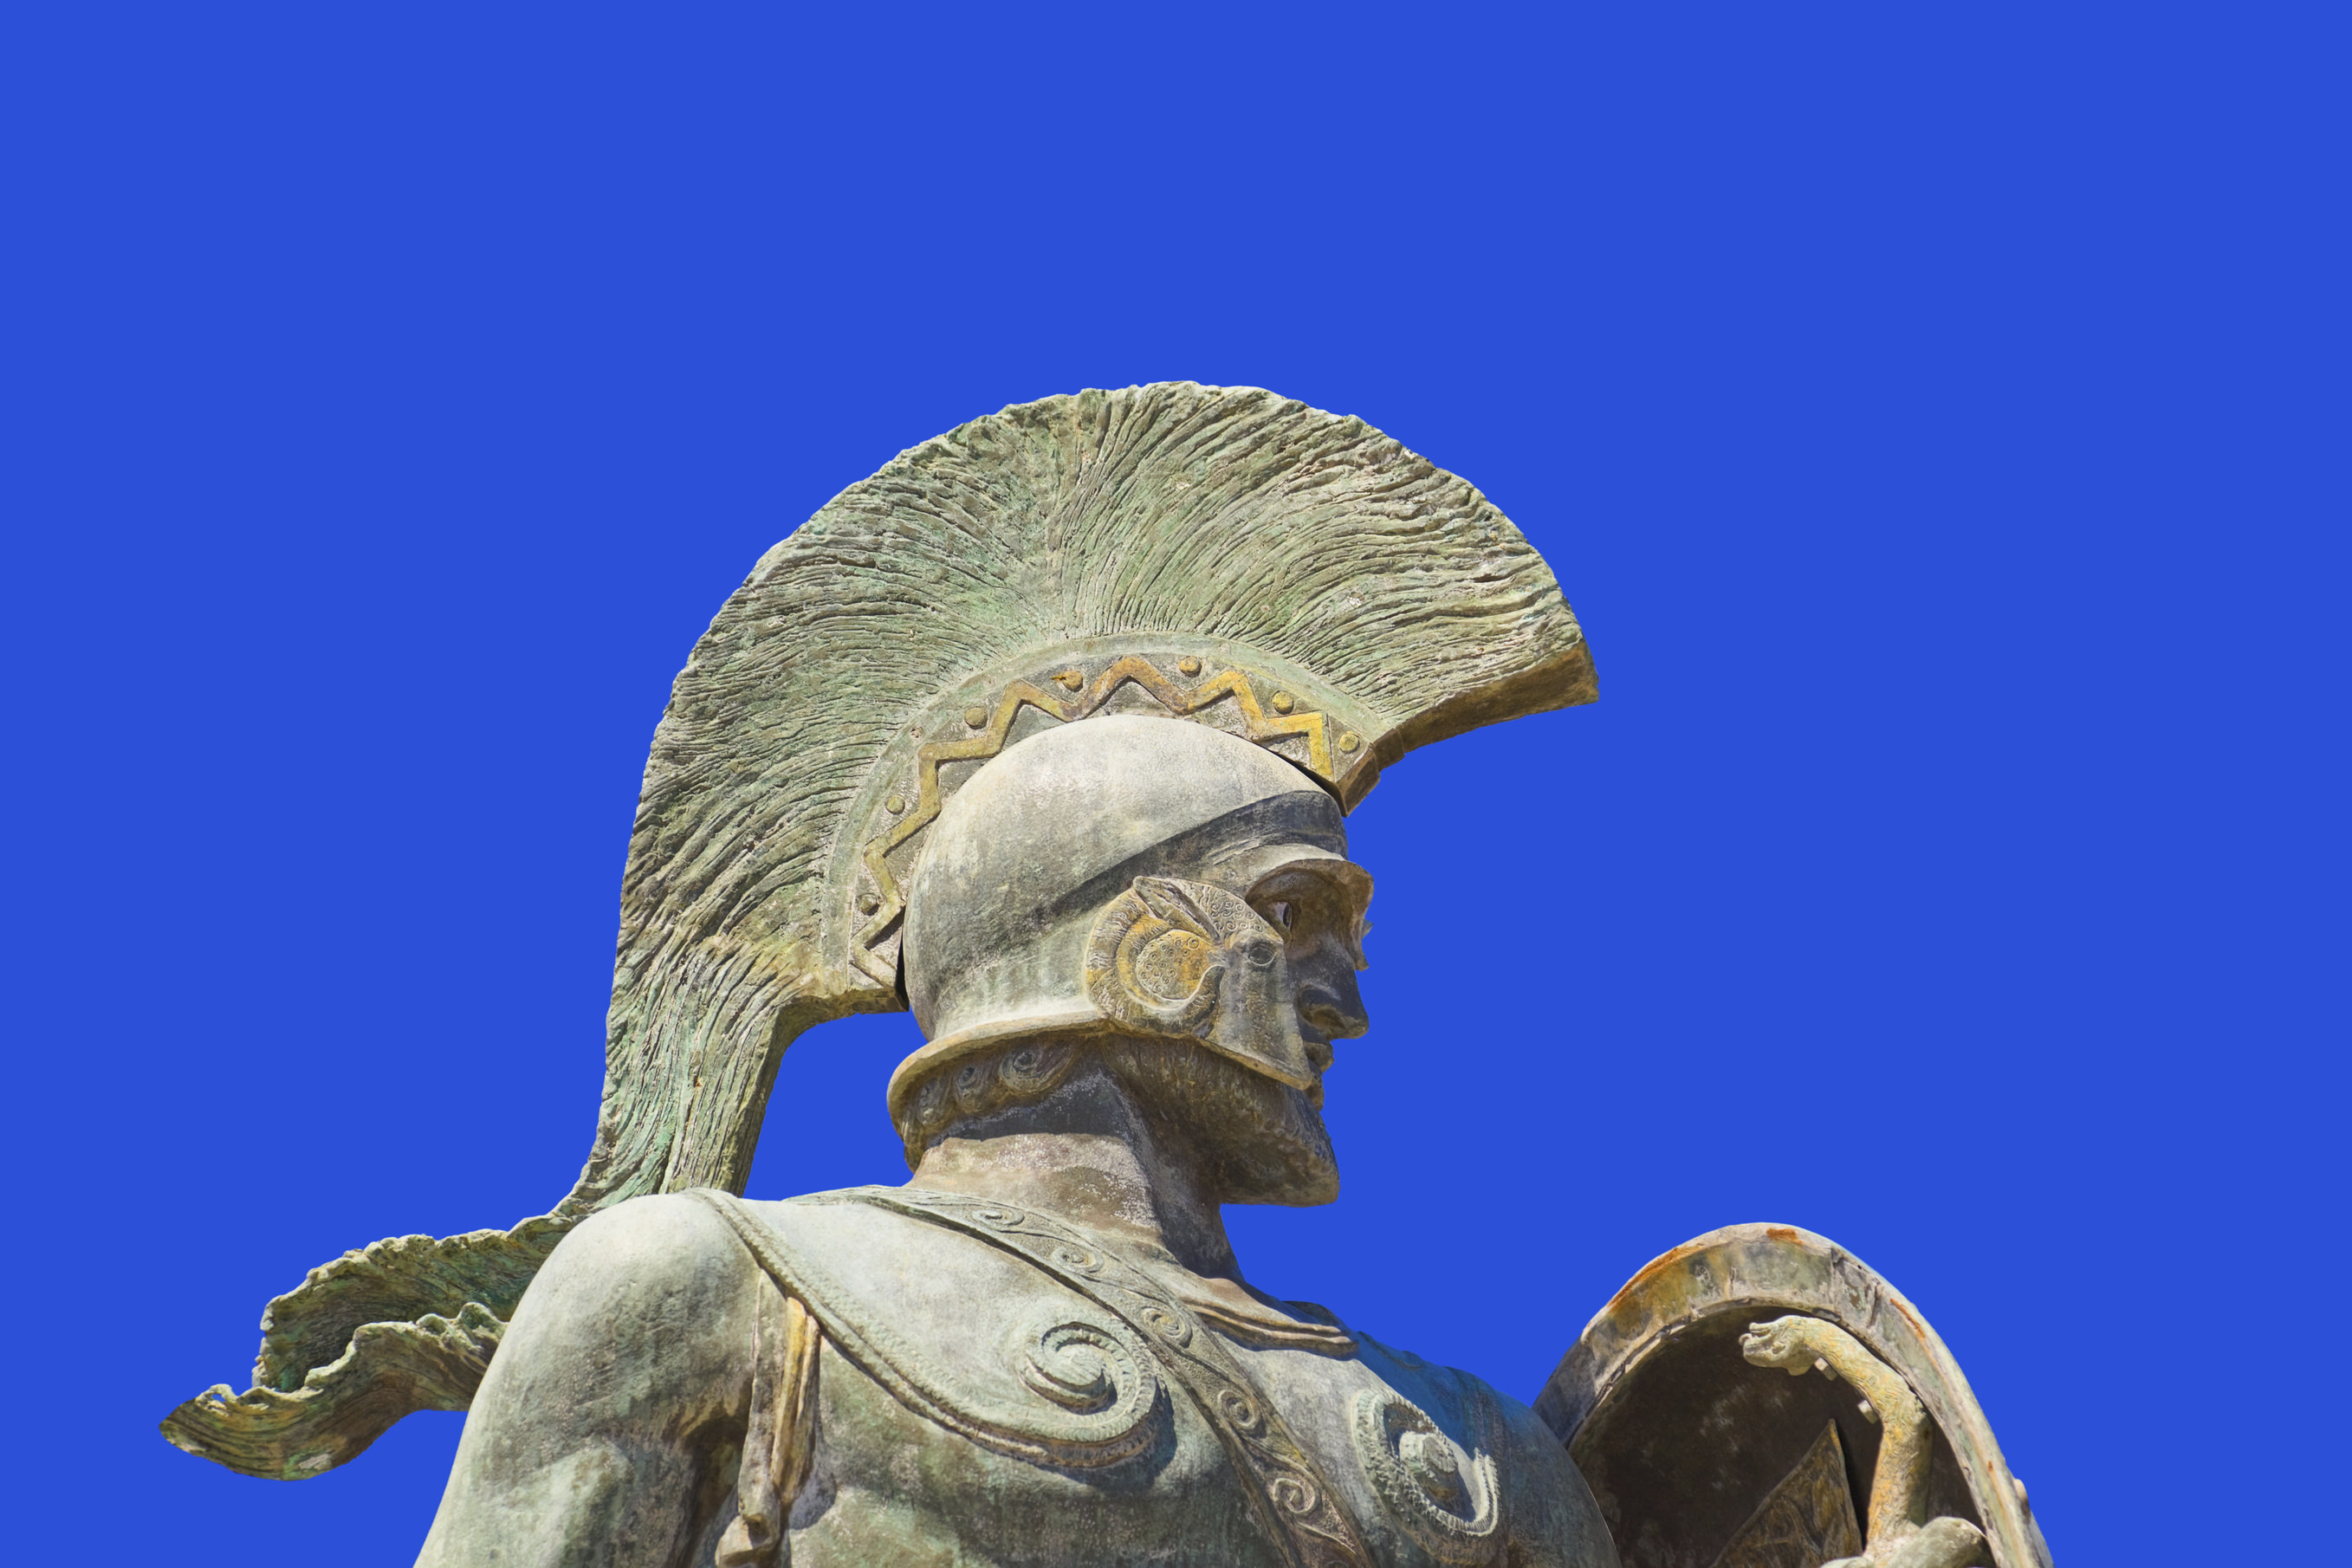 Statue of king Leonidas in Sparta, Greece - history background